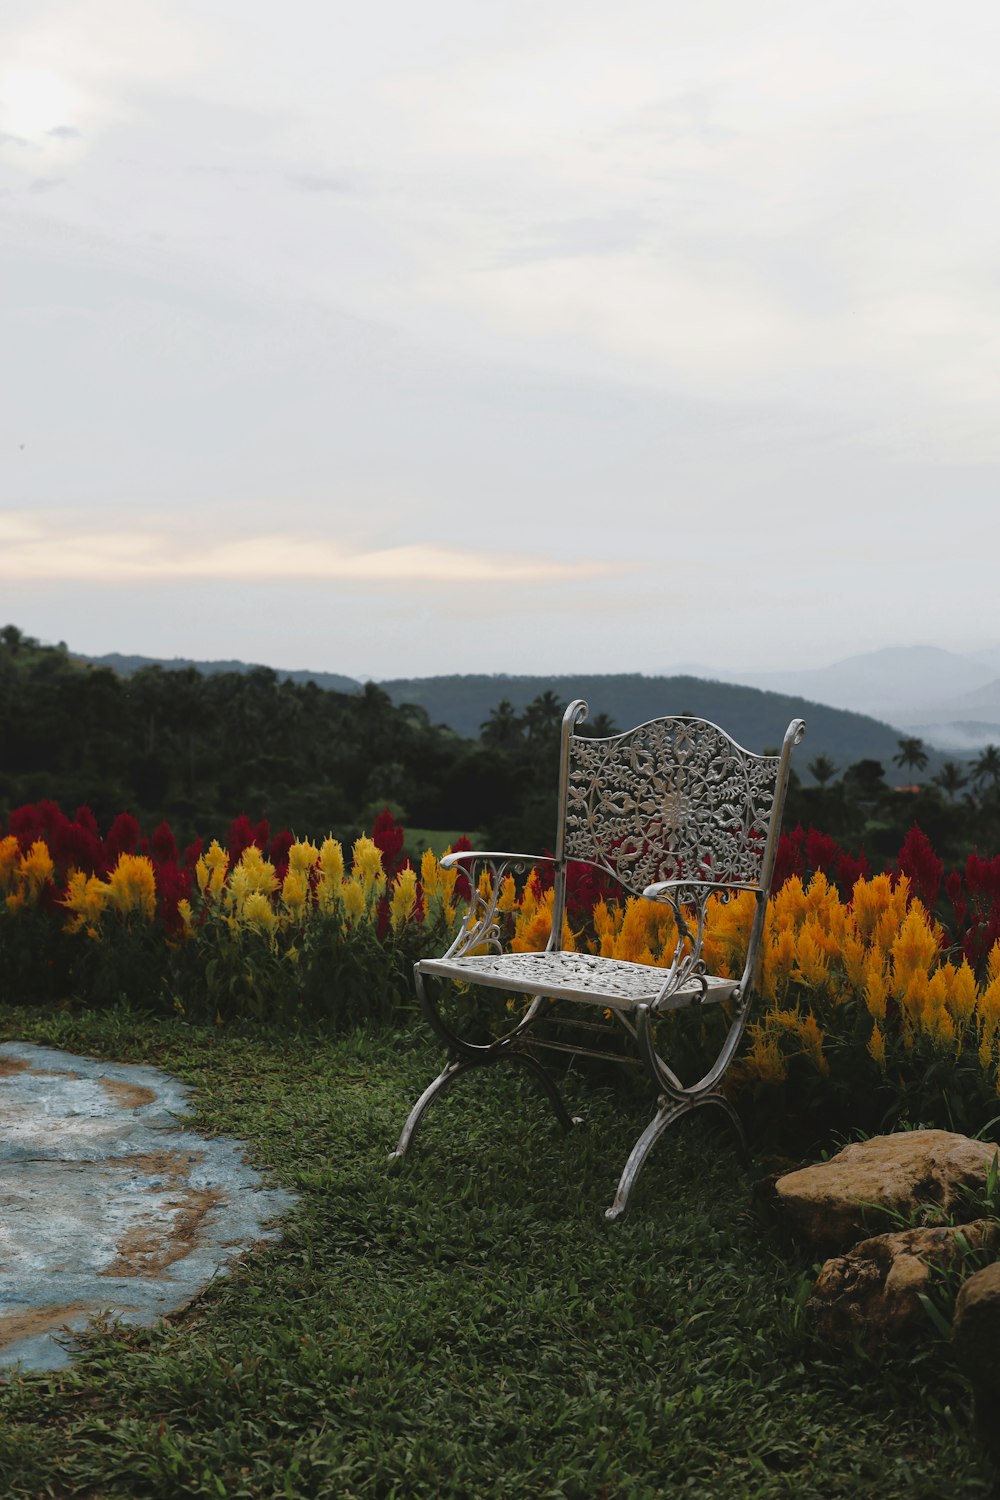 a bench sitting in the middle of a field of flowers